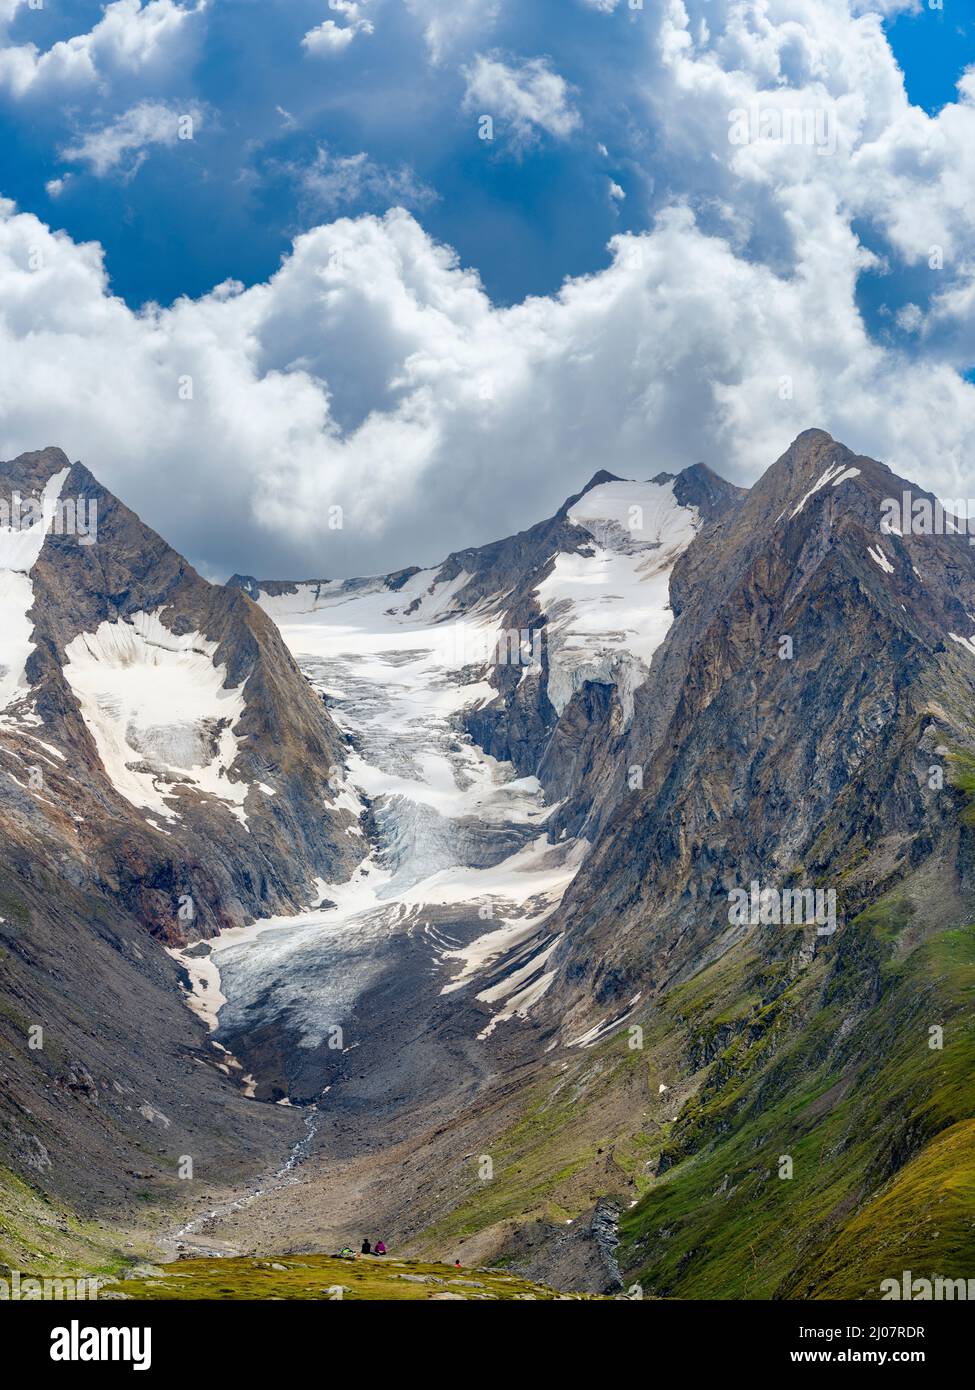 Valley Gaisbergtal, Mt. Hochfirst and Mt. Lieberkogel seen from Mt. Hohe Mut. Oetztal Alps in the nature park Oetztal near village Obergurgl. Europe, Stock Photo